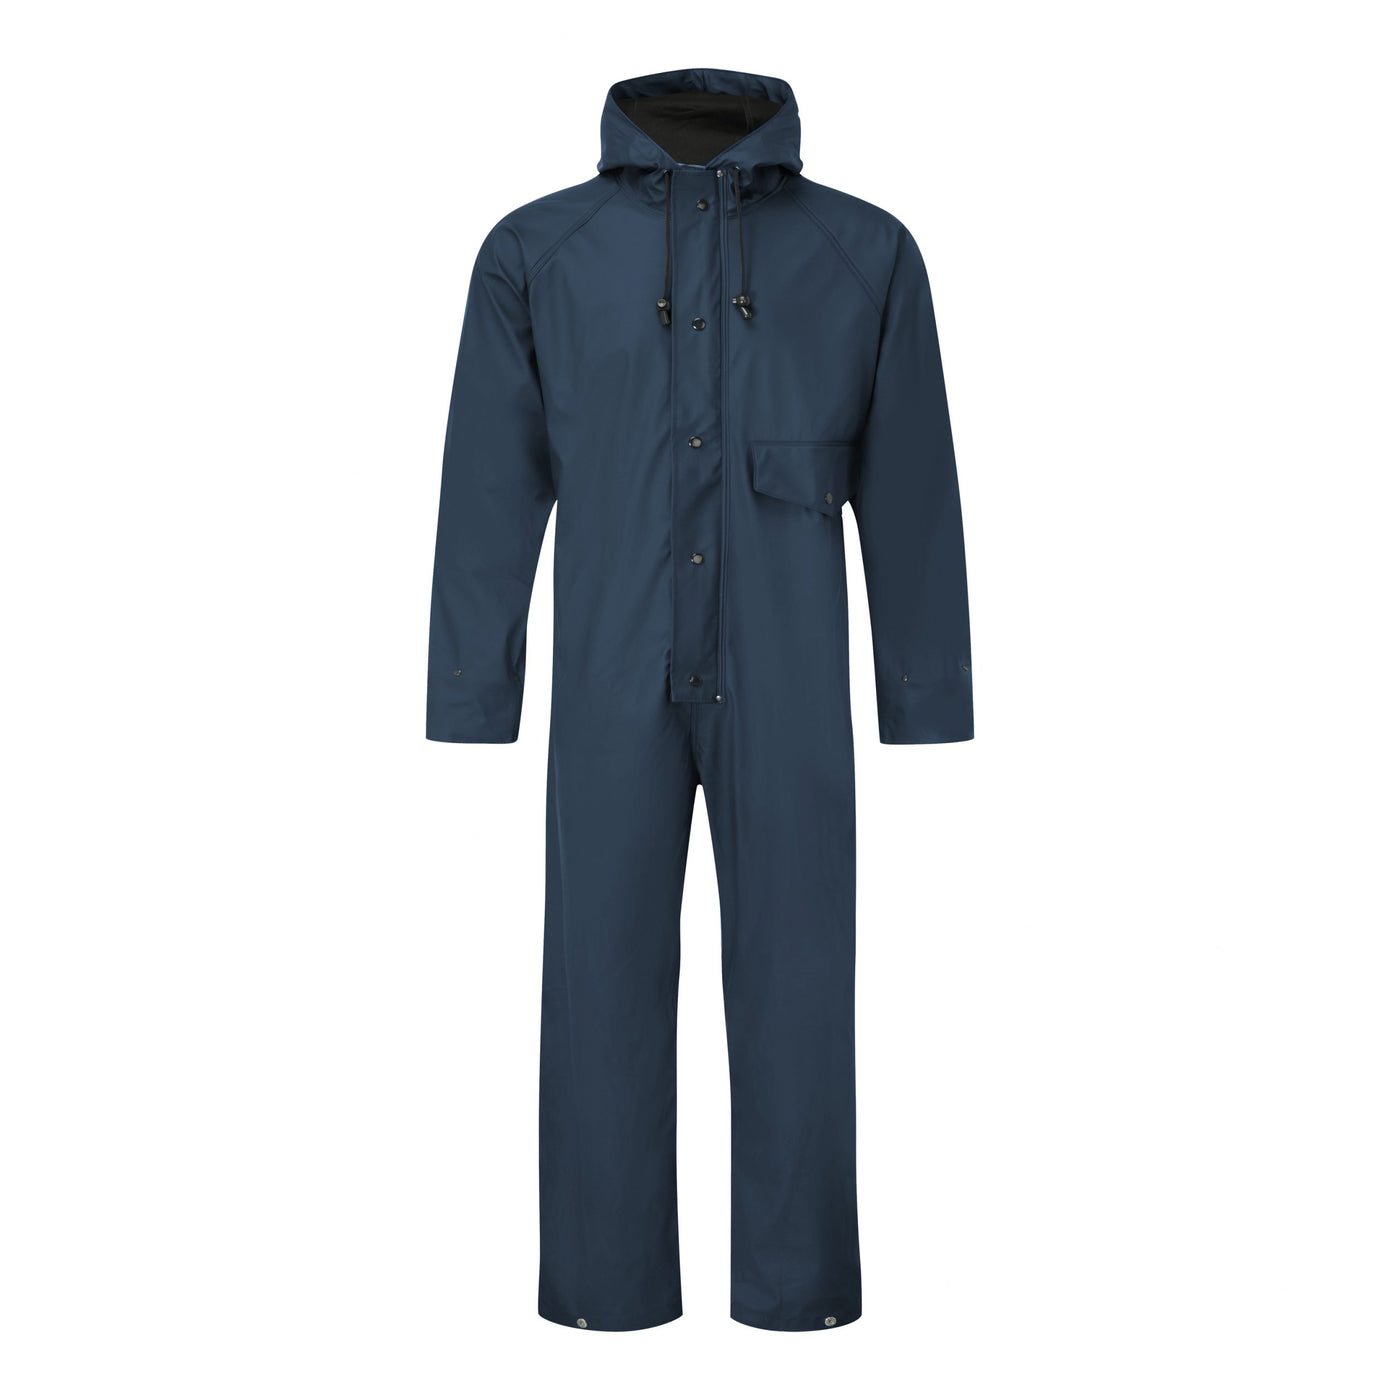 Castle Clothing 320 Flex Overall, Navy Blue